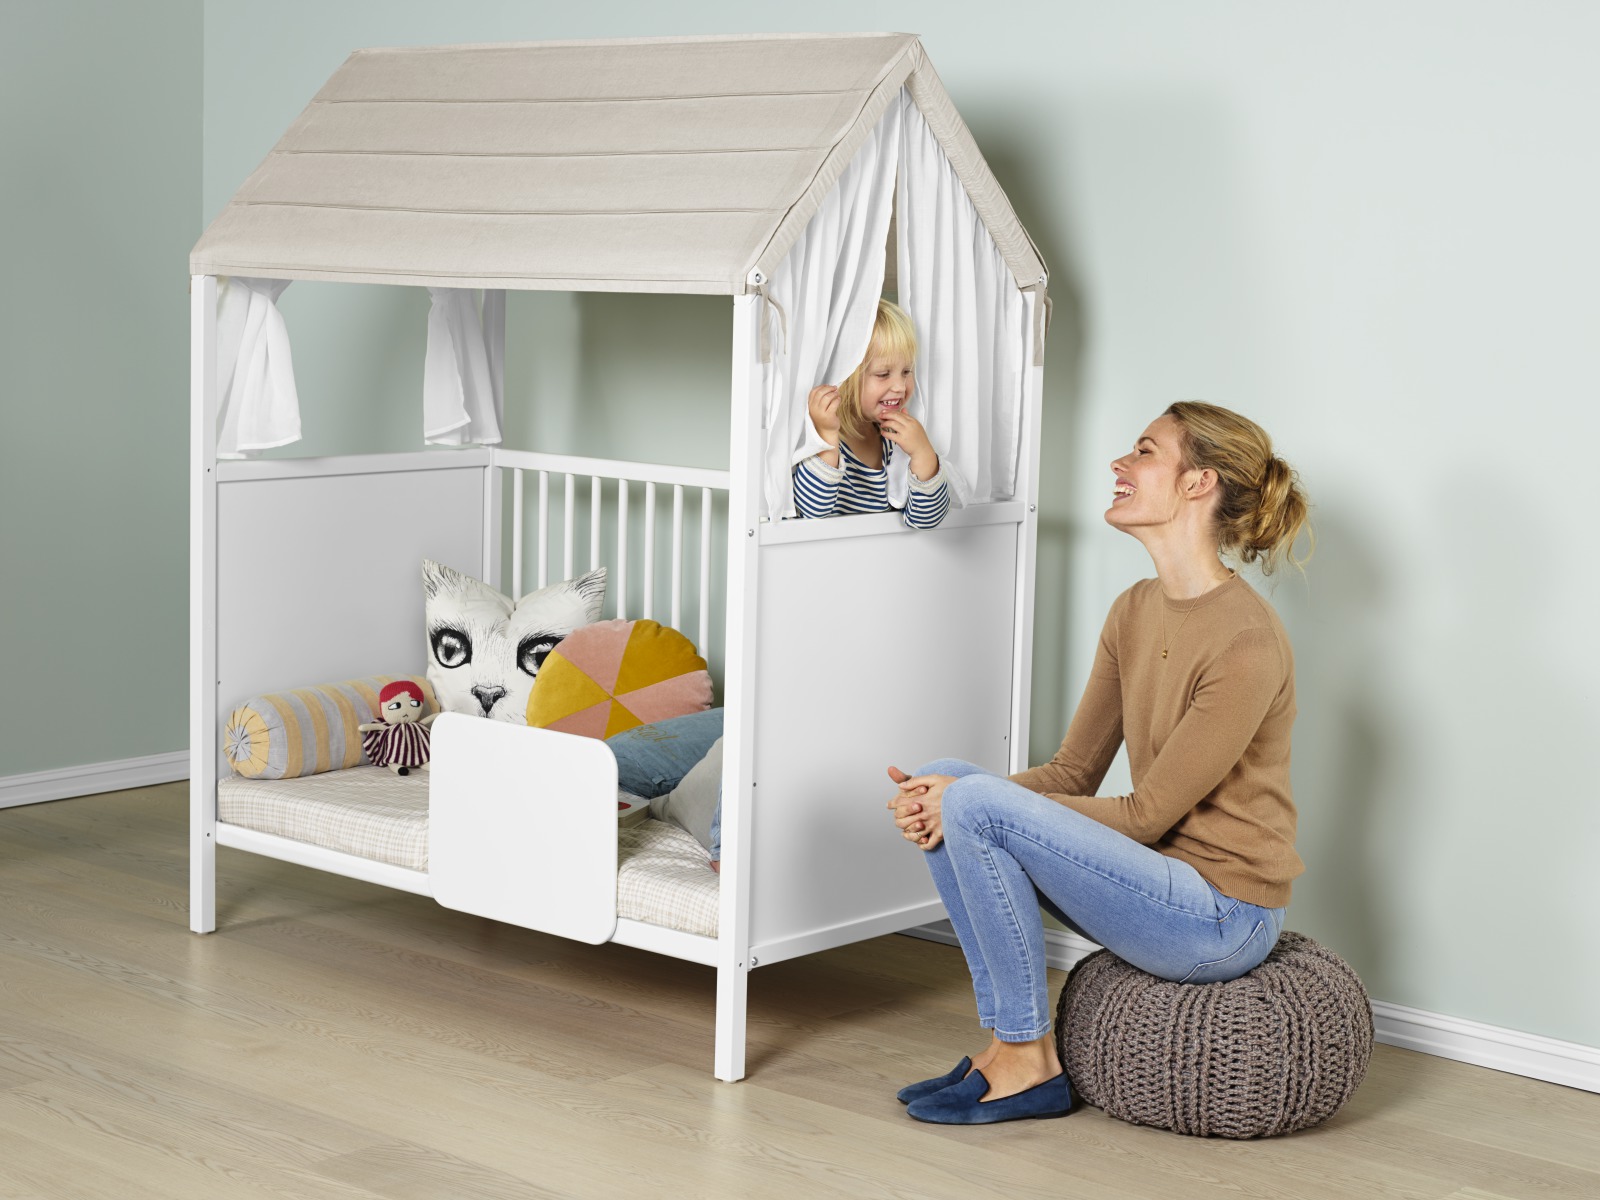 stokke home bed cot mattress